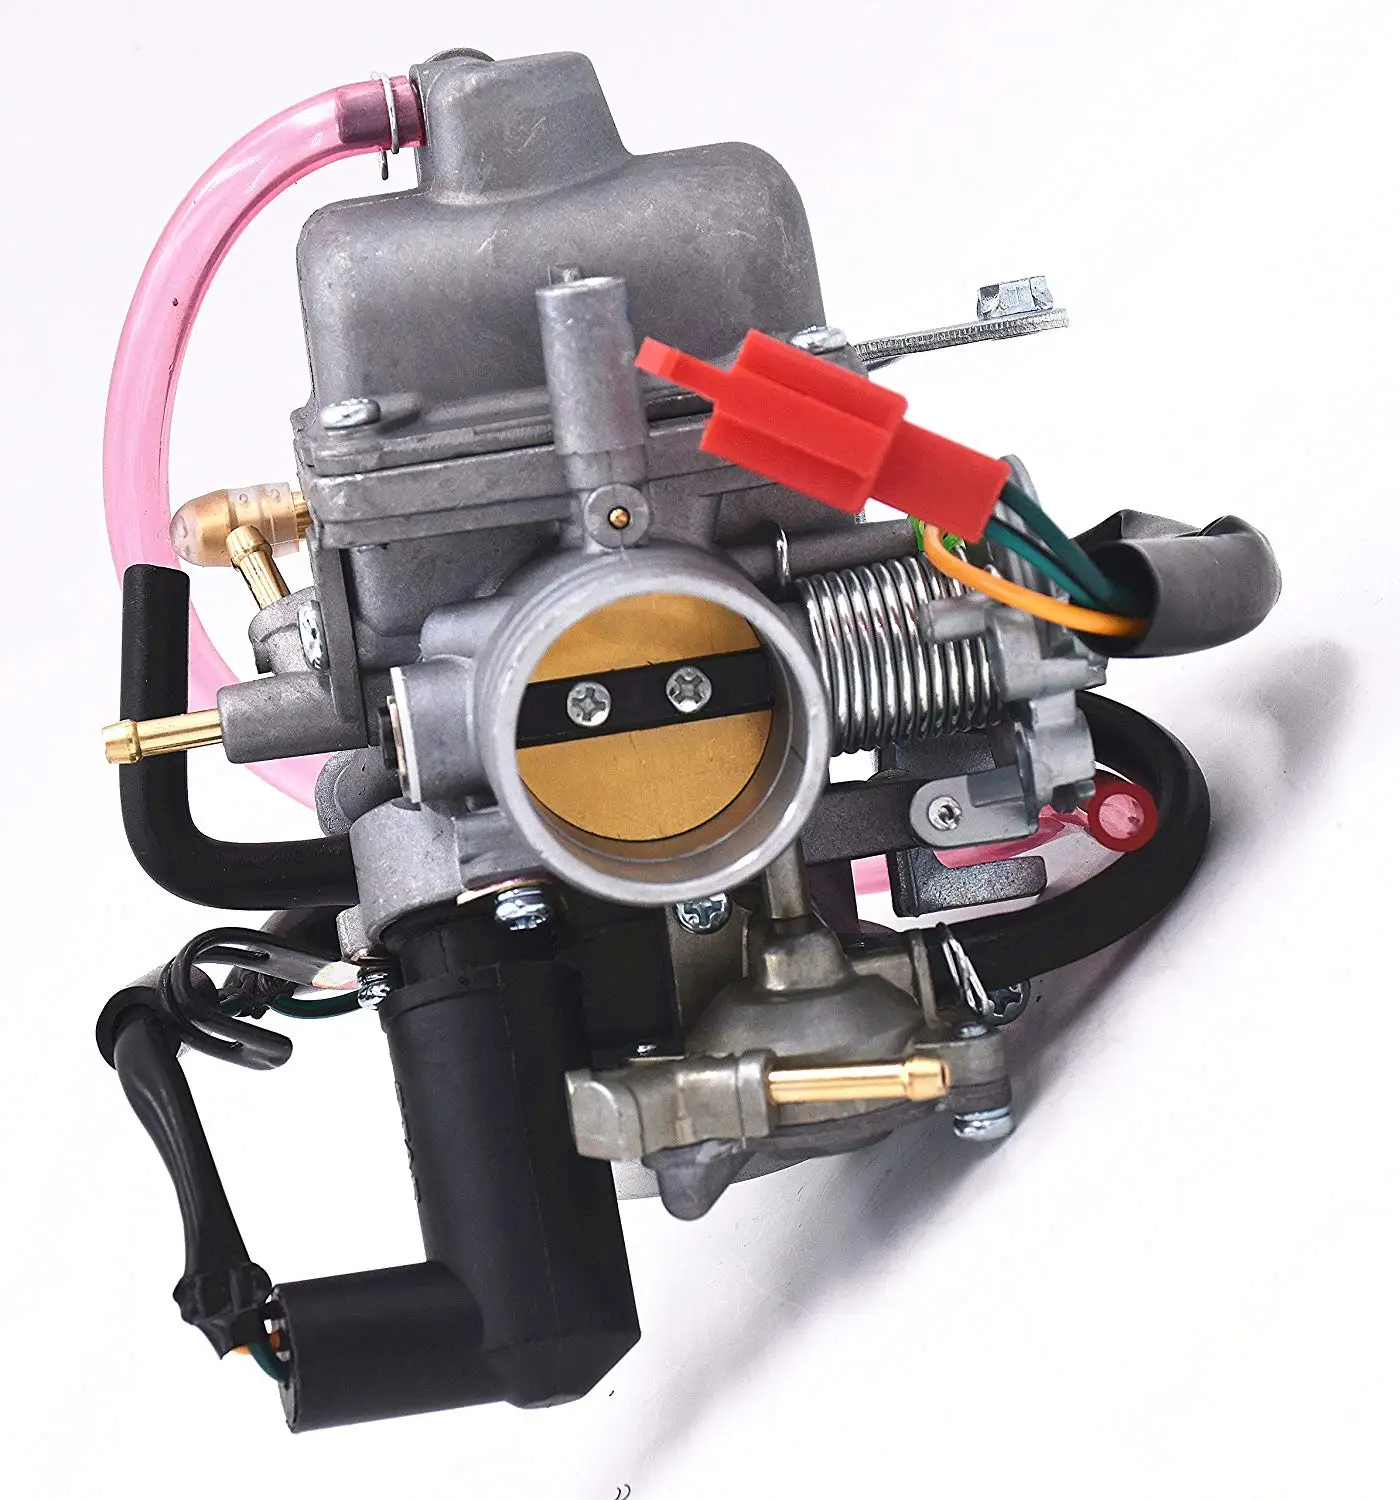 

Motorcycle 30mm Carburetor Carb for CF250cc ATV Go Kart Moped Scooter W/Electric Choke Replacement Accessories Fuel Parts